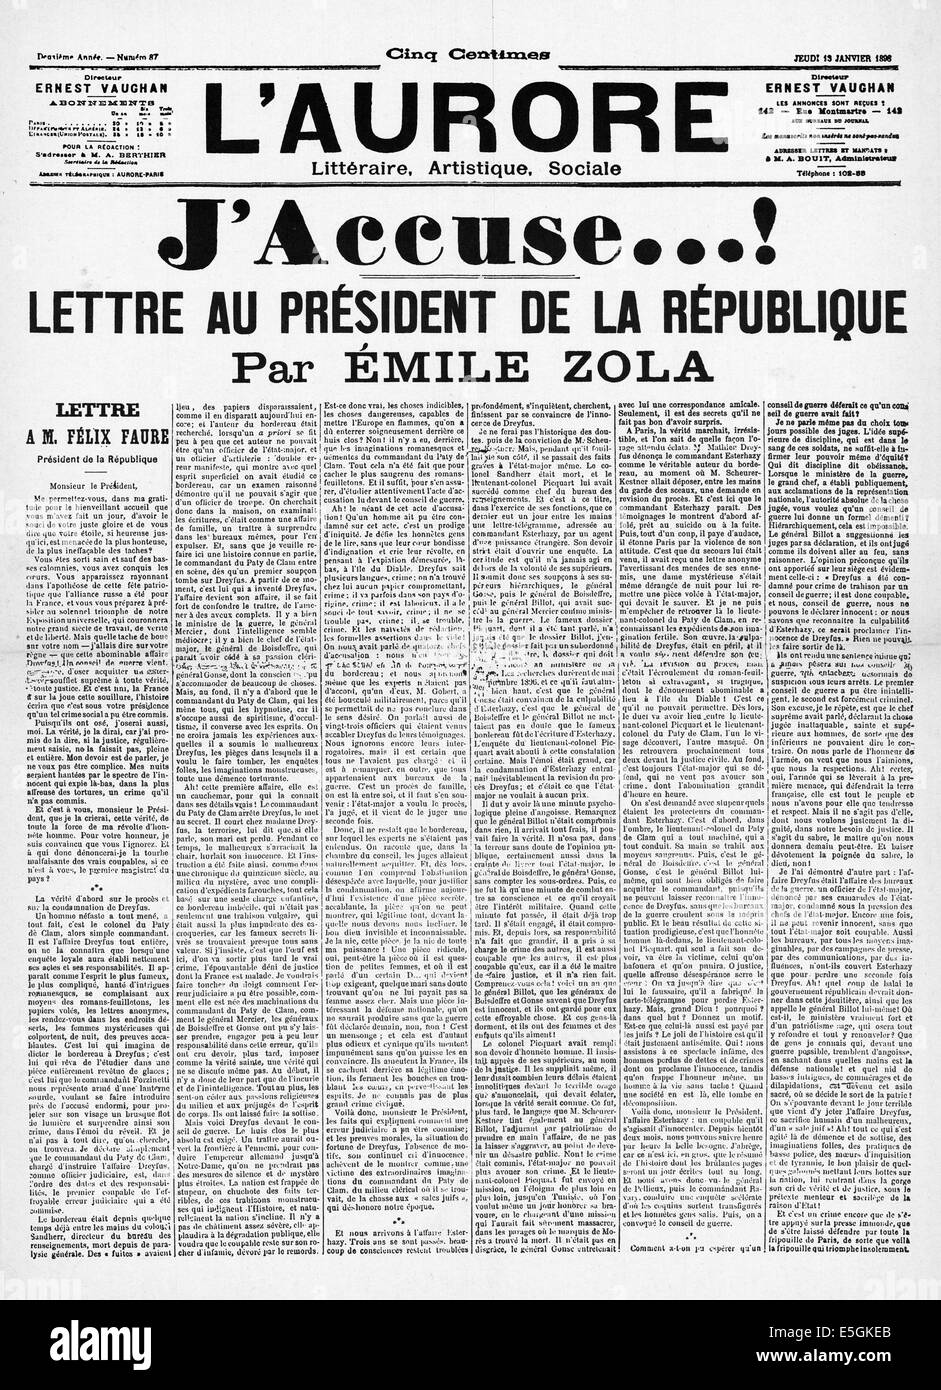 1896 L'aurore (France) front page reporting Emile Zola's letter to the President 'J'accuse..' I Accuse, Letter to the President of the Republic' relating to the Dreyfus affair Stock Photo